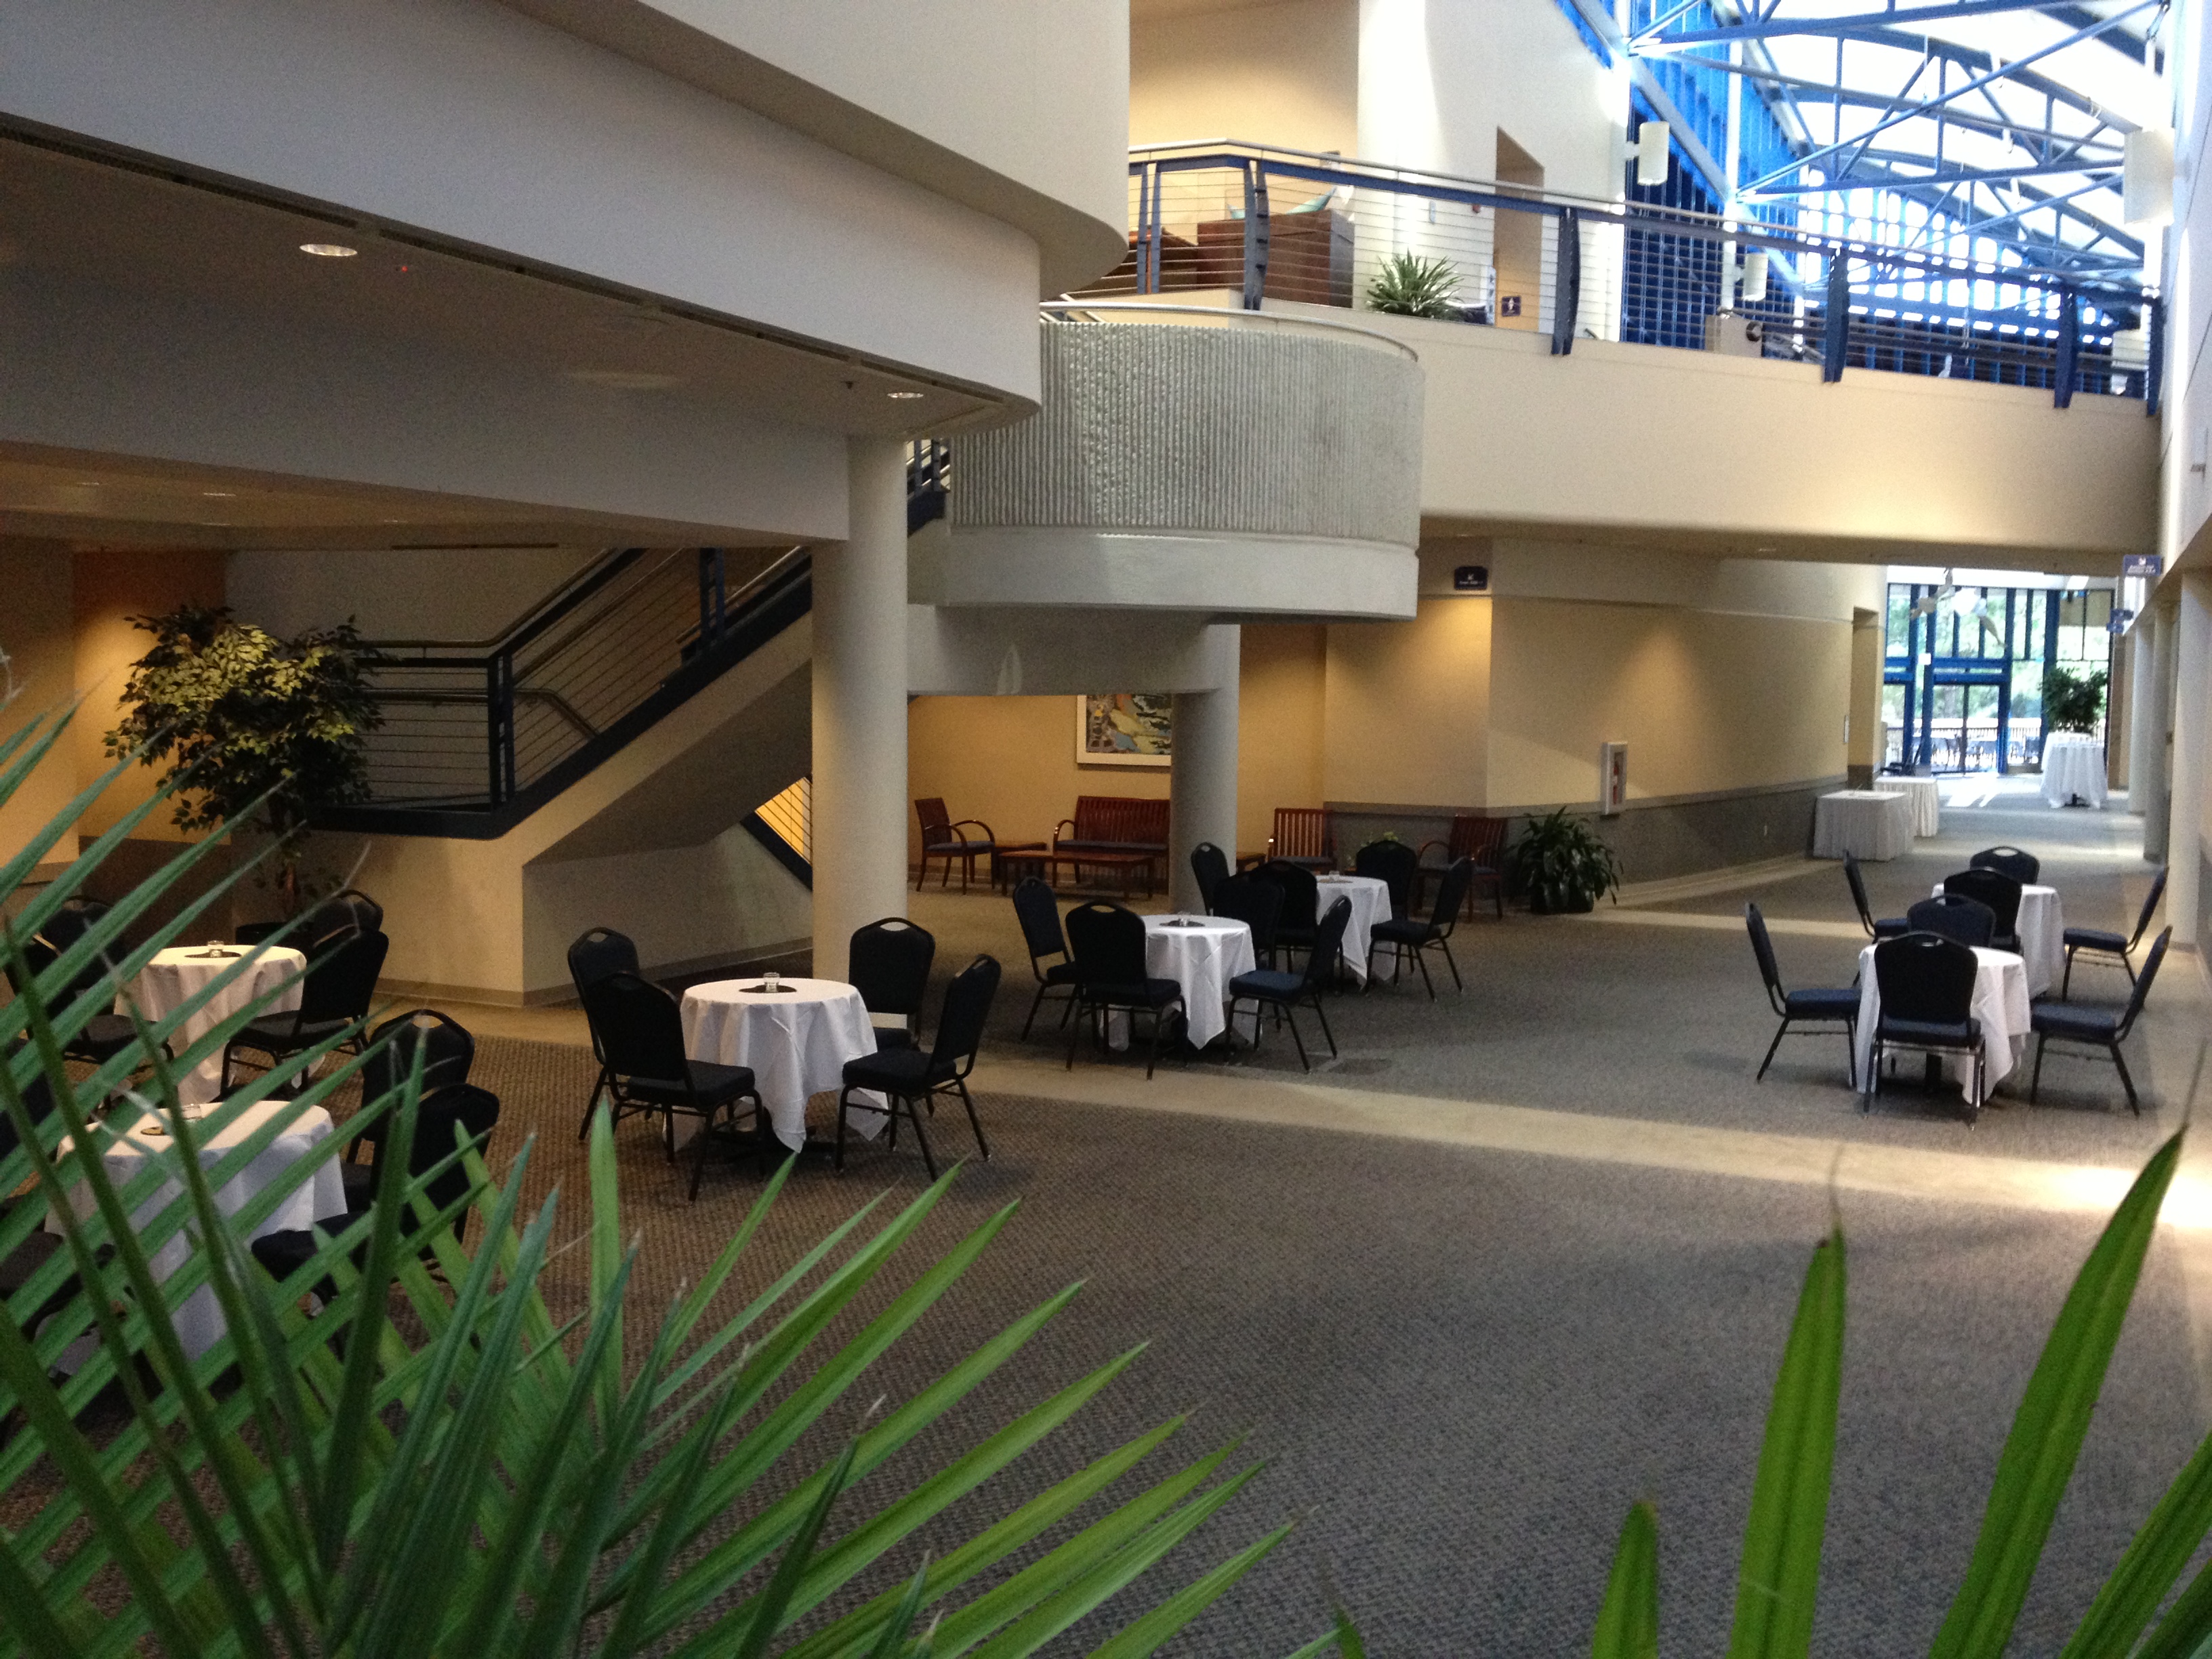 University Center hallway with tables setup throughout the hall